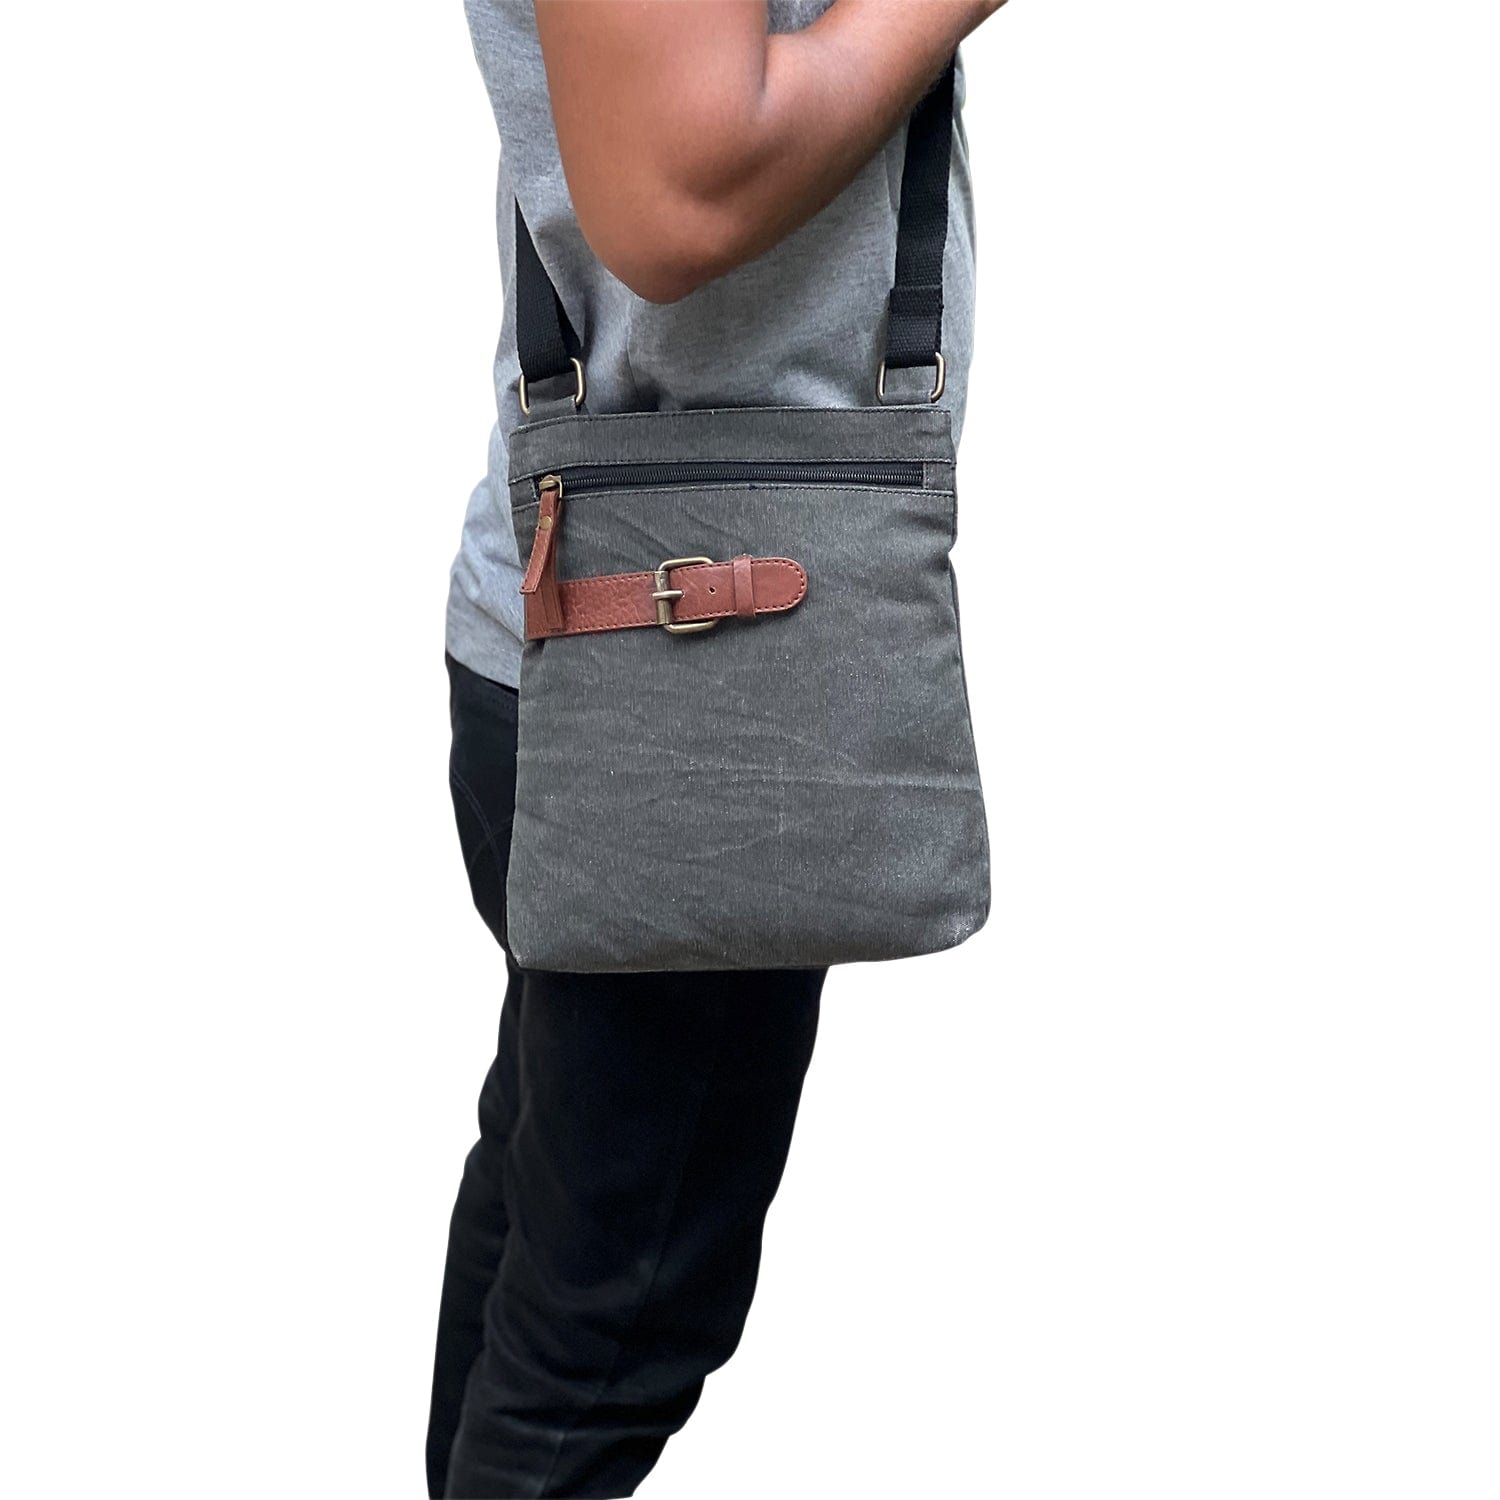 Mona B Upcycled Canvas Messenger Crossbody Bag with Stylish Design for Men and Women: Flap - Crossbody Sling Bag by Mona-B - Backpack, EOSS, Flash Sale, Flat70, Sale, Shop1999, Shop2999, Shop3999